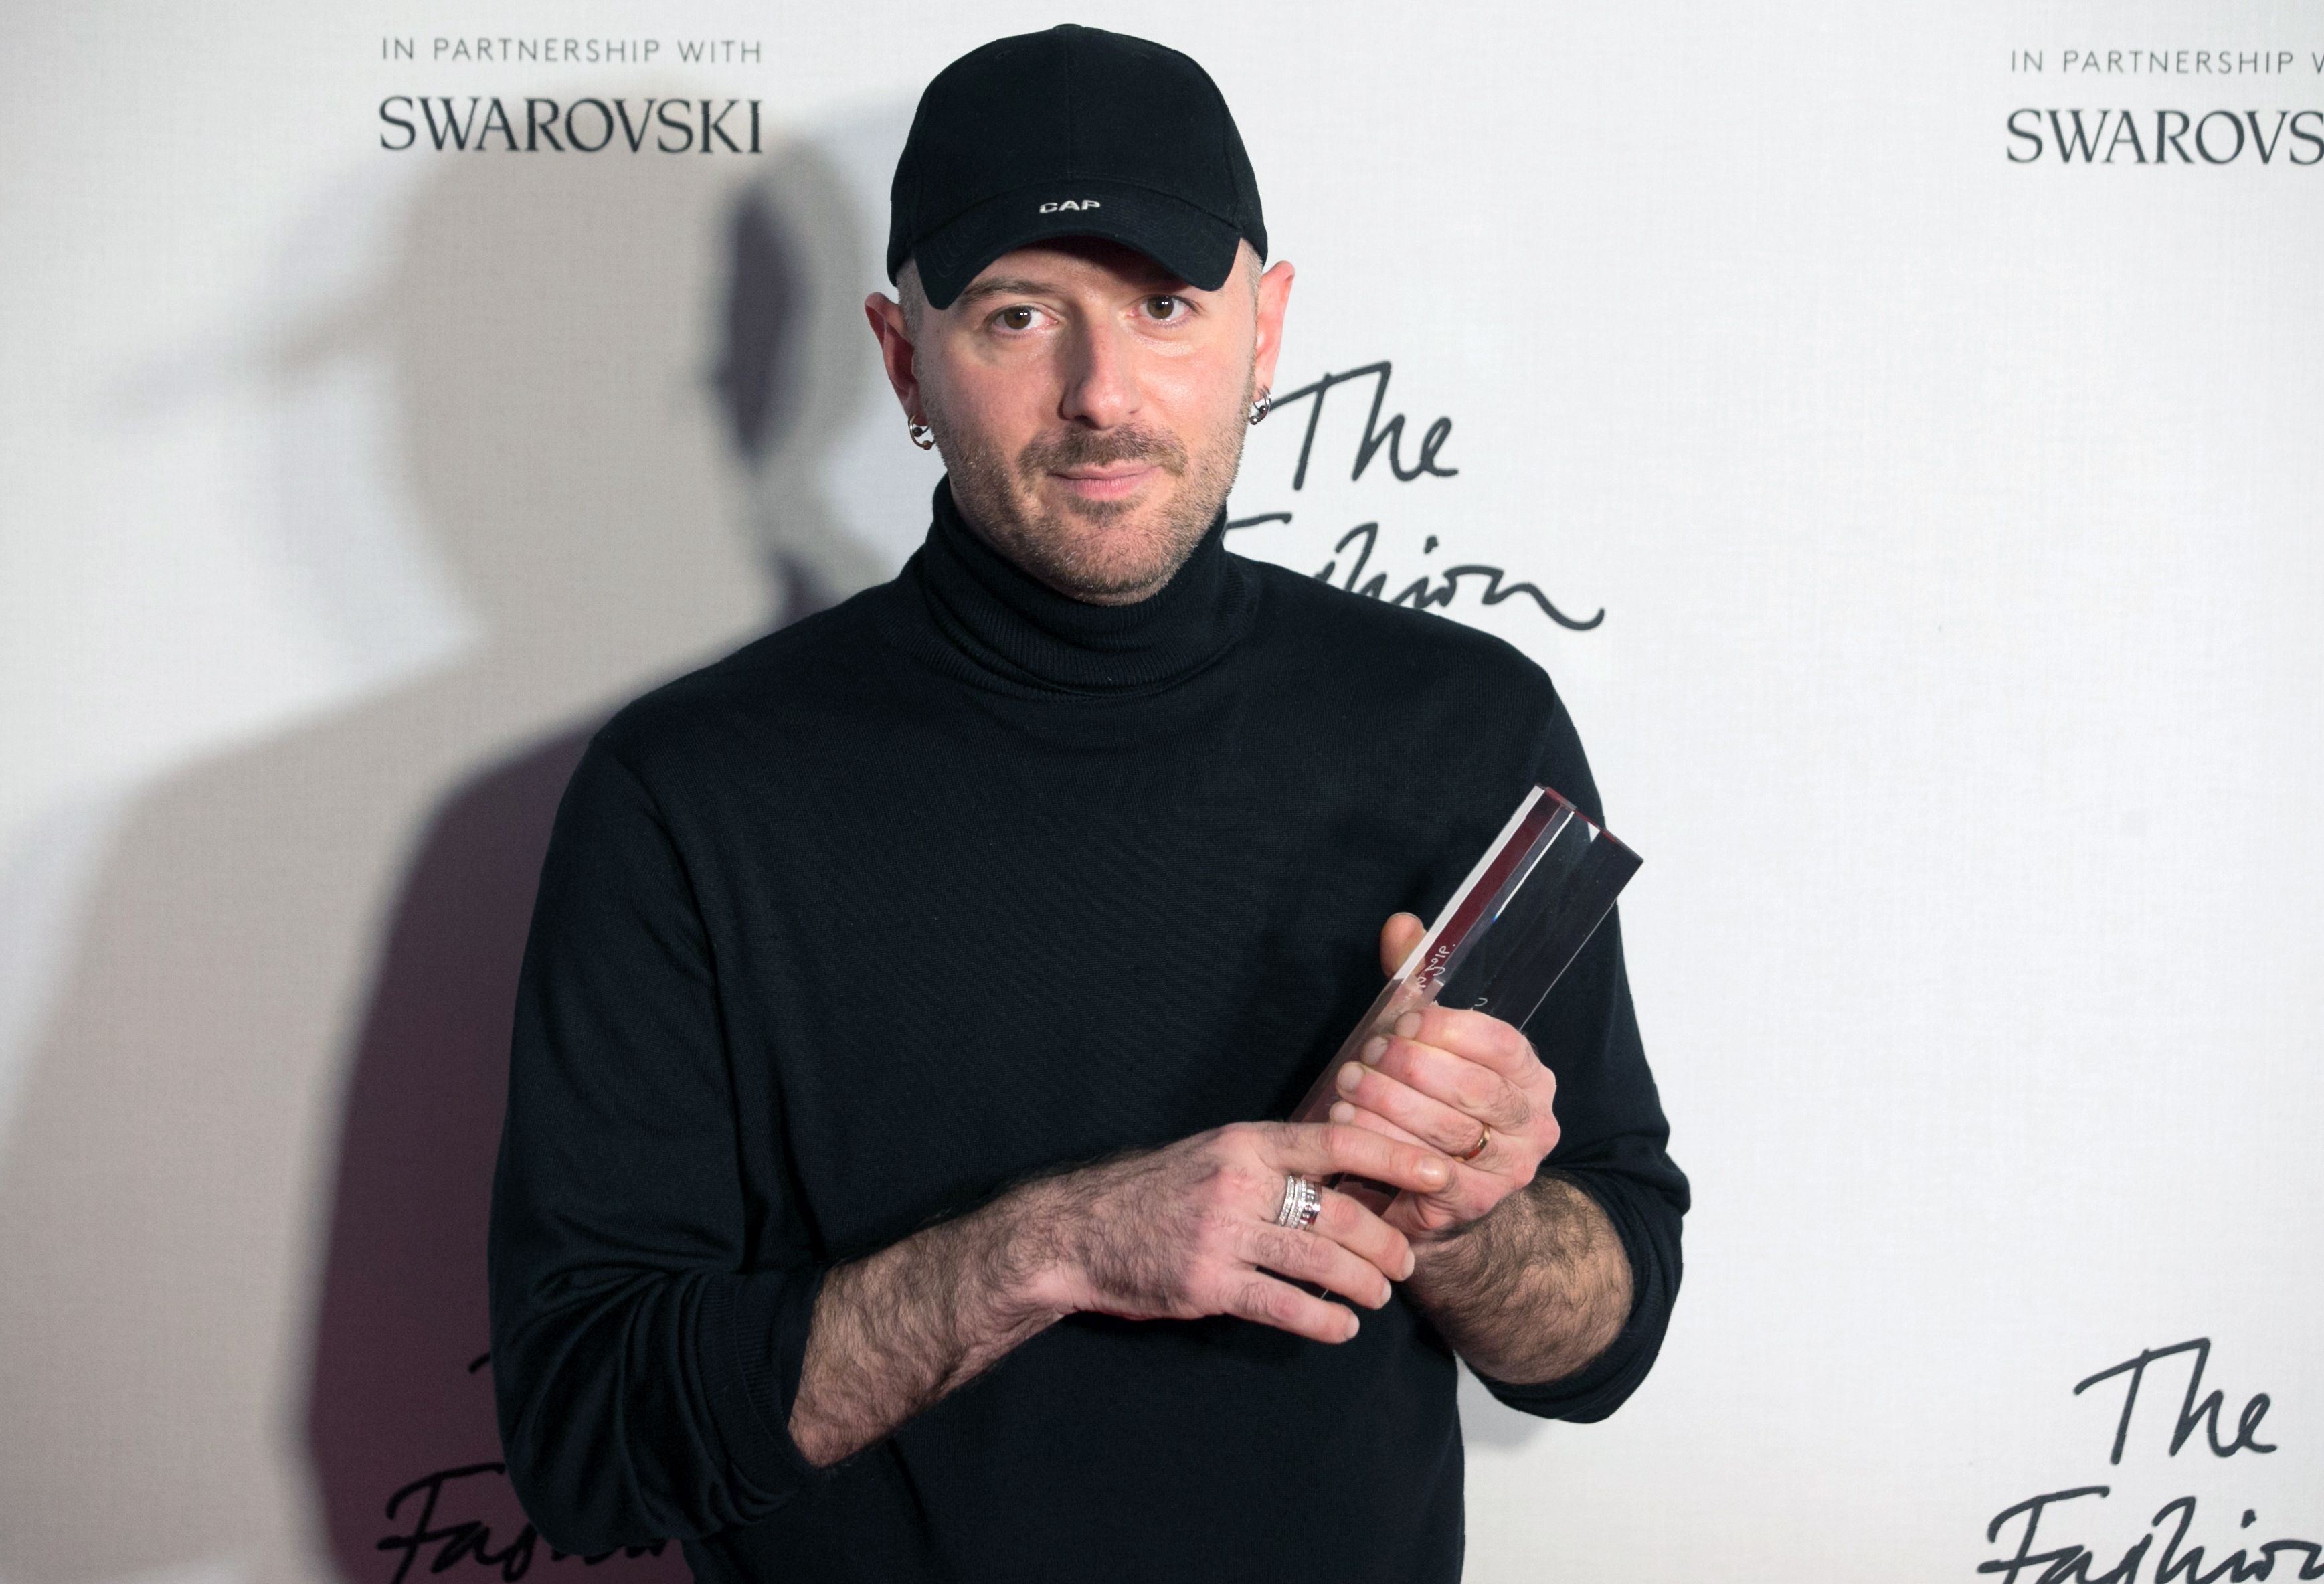 Designer Demna Gvasalia of fashion house Balenciaga poses with his award after being named winner of the International Ready-to-Wear Designer award during the British Fashion Awards 2016 in London. Photo: AFP